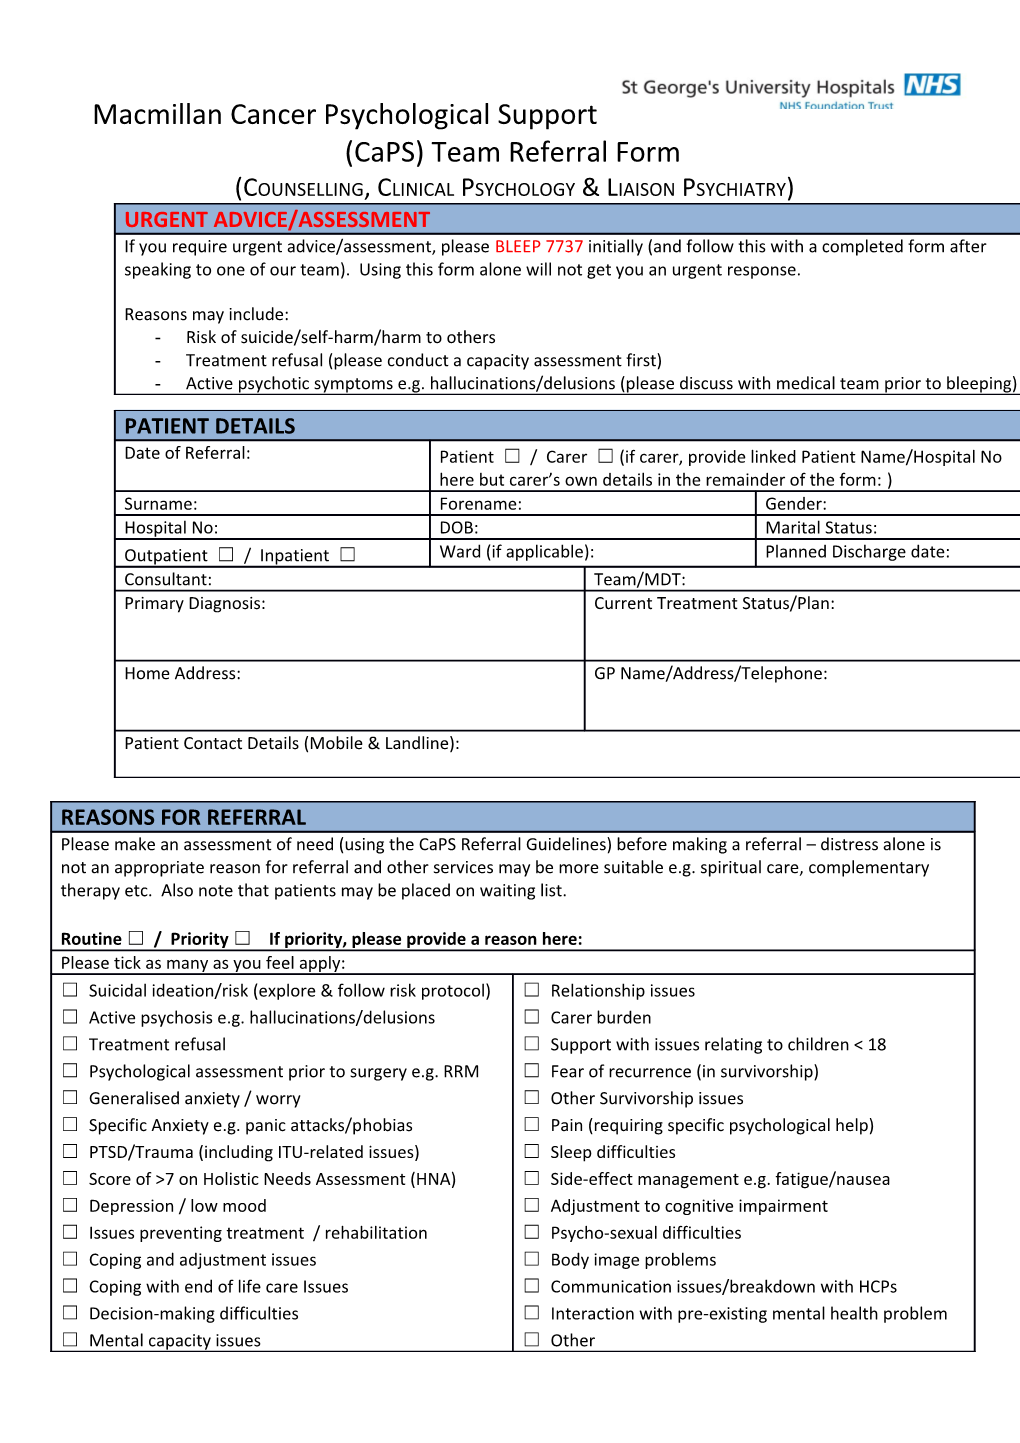 Macmillan Cancer Psychological Support (Caps) Team Referral Form